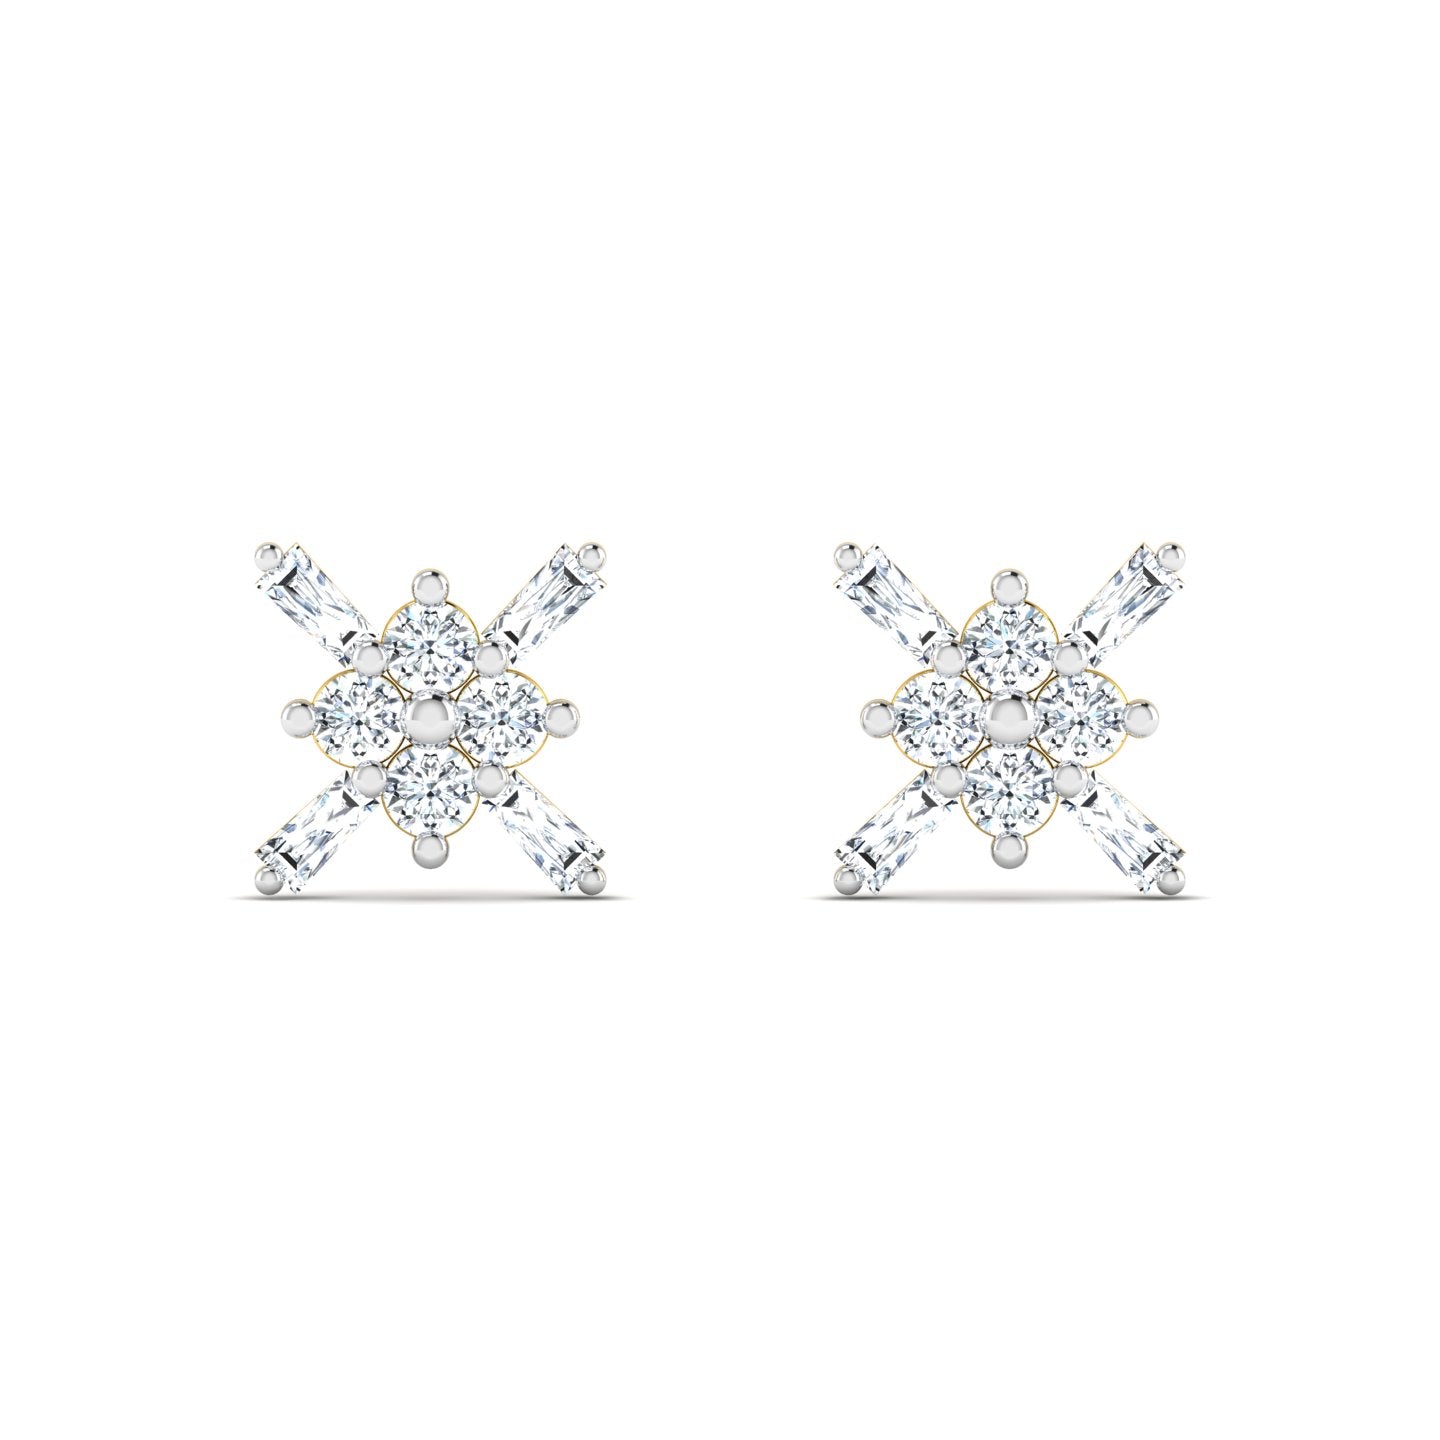 Equilateral Diamond Earring